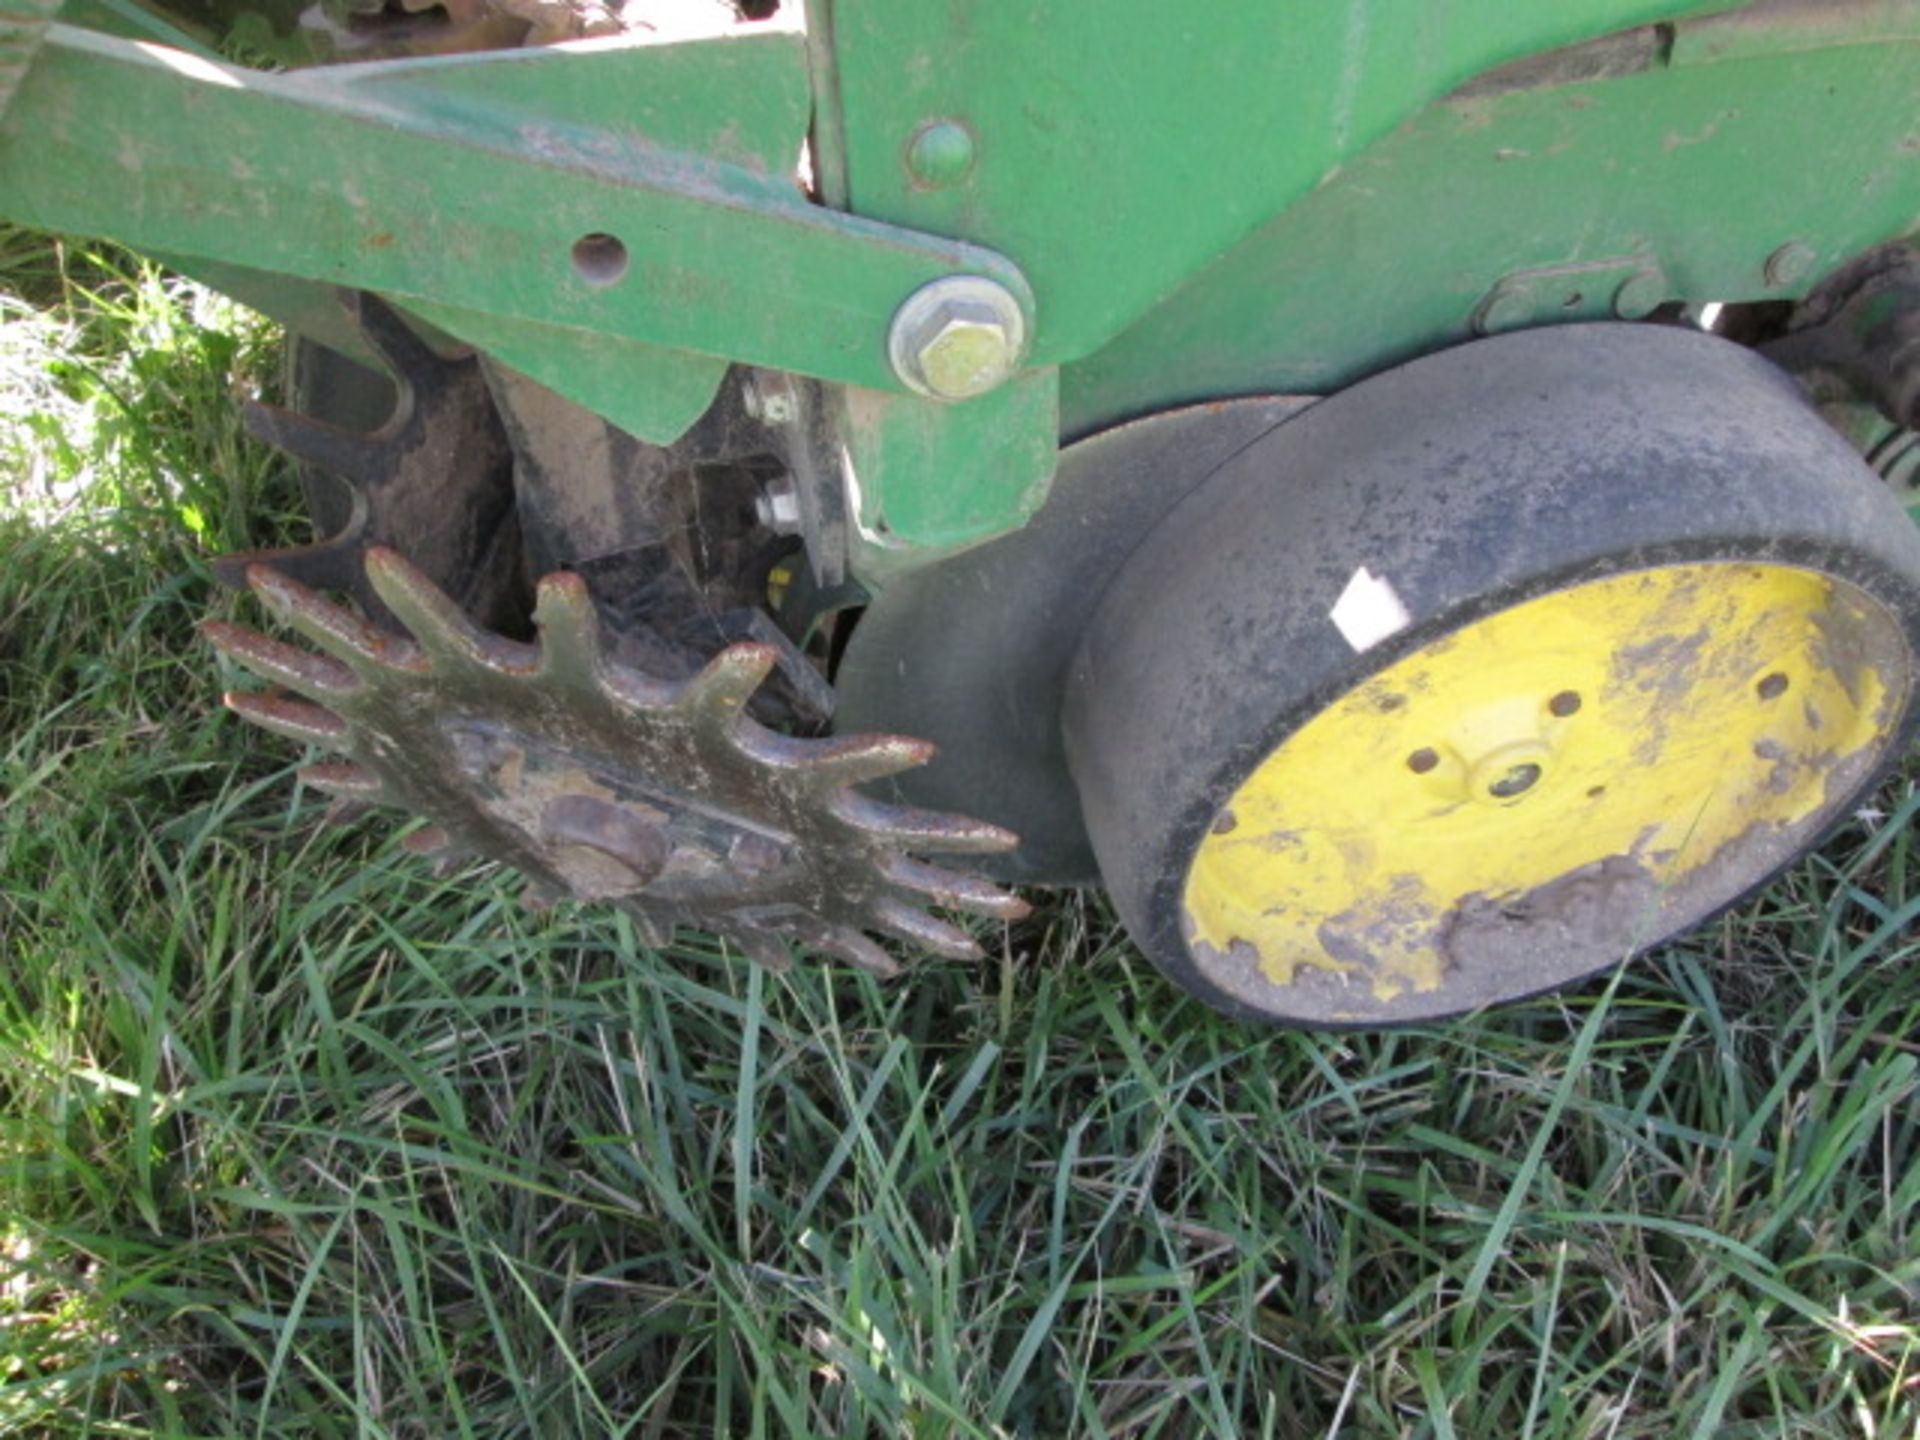 JD 7200 12R30 PLANTER, HYDR WING FOLD,TRASH WHIPPERS, INSECT, 250 MONT - Image 5 of 8